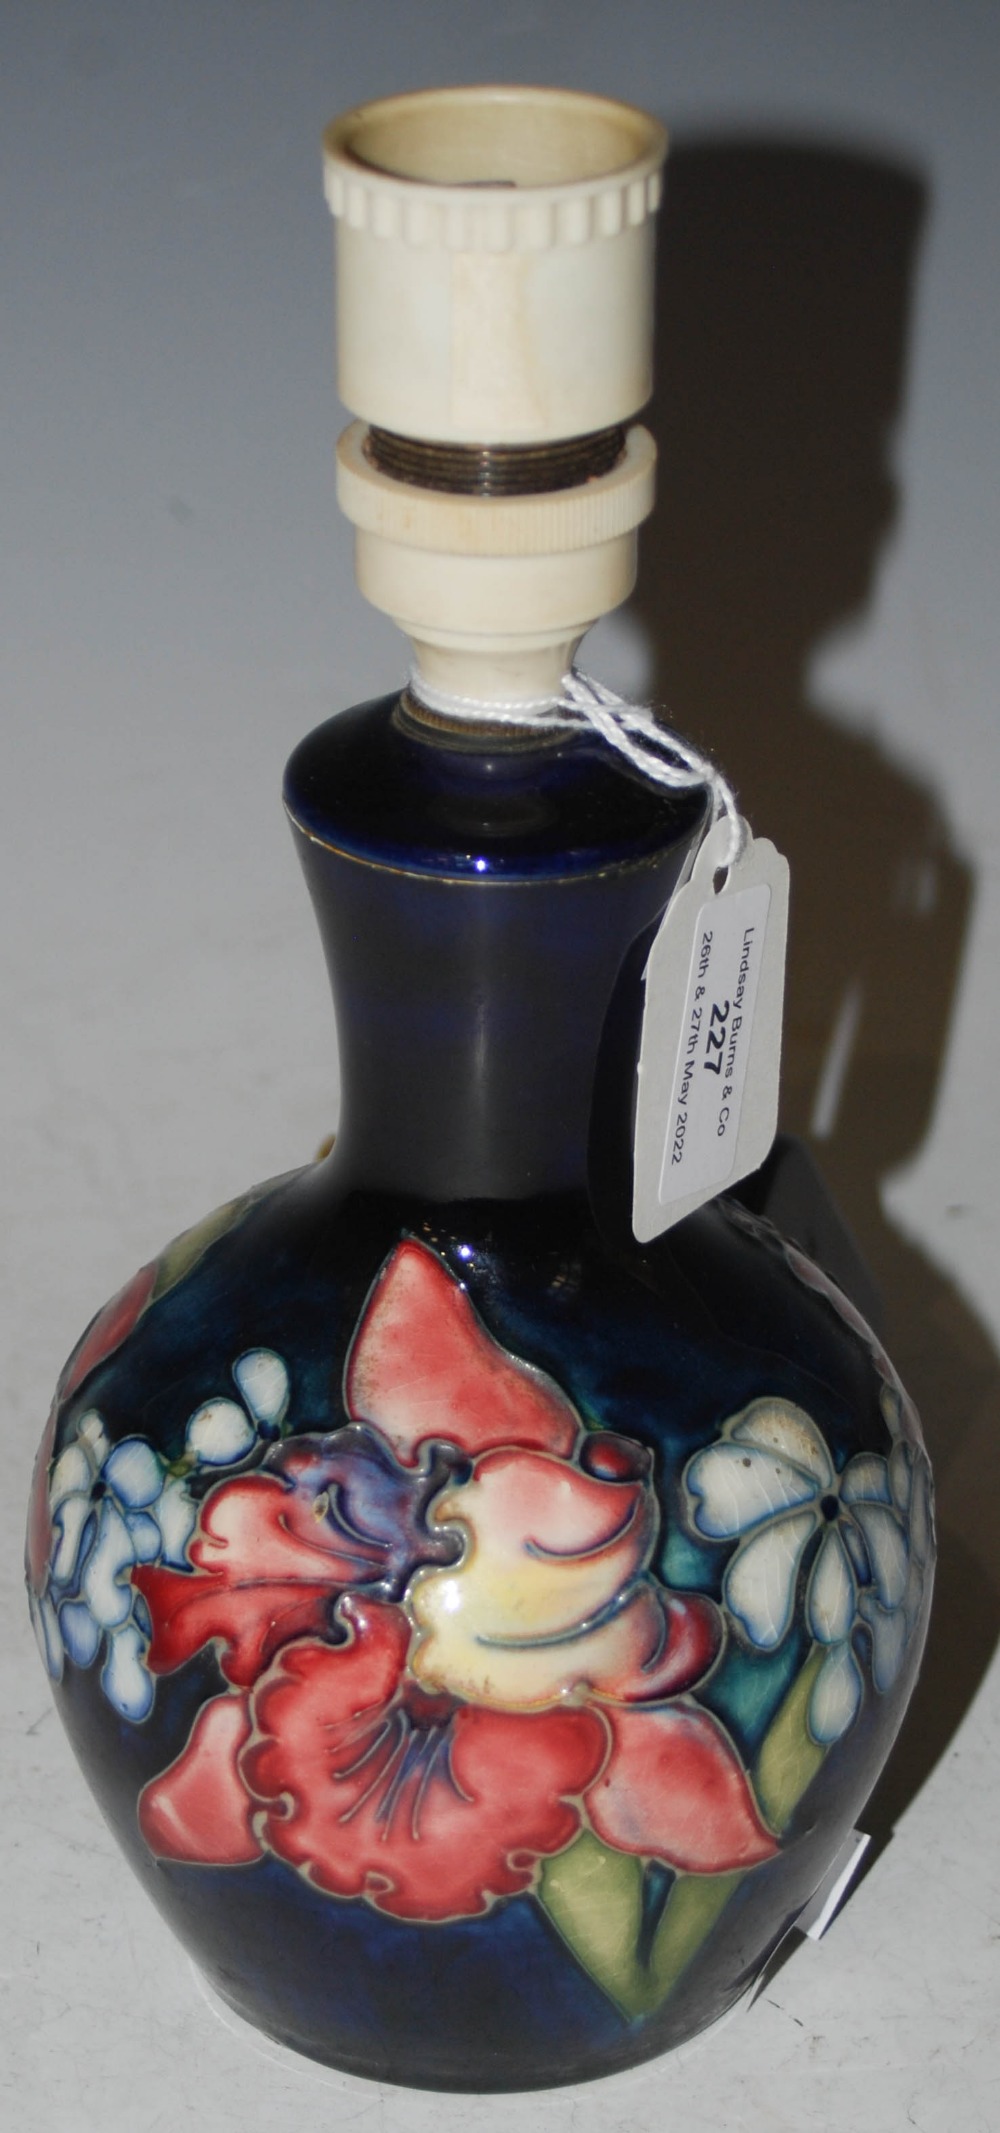 A MOORCROFT TABLE LAMP, THE BODY WITH FLORAL DESIGN ON A BLUE GROUND, IMPRESSED 'MOORCROFT' AND '